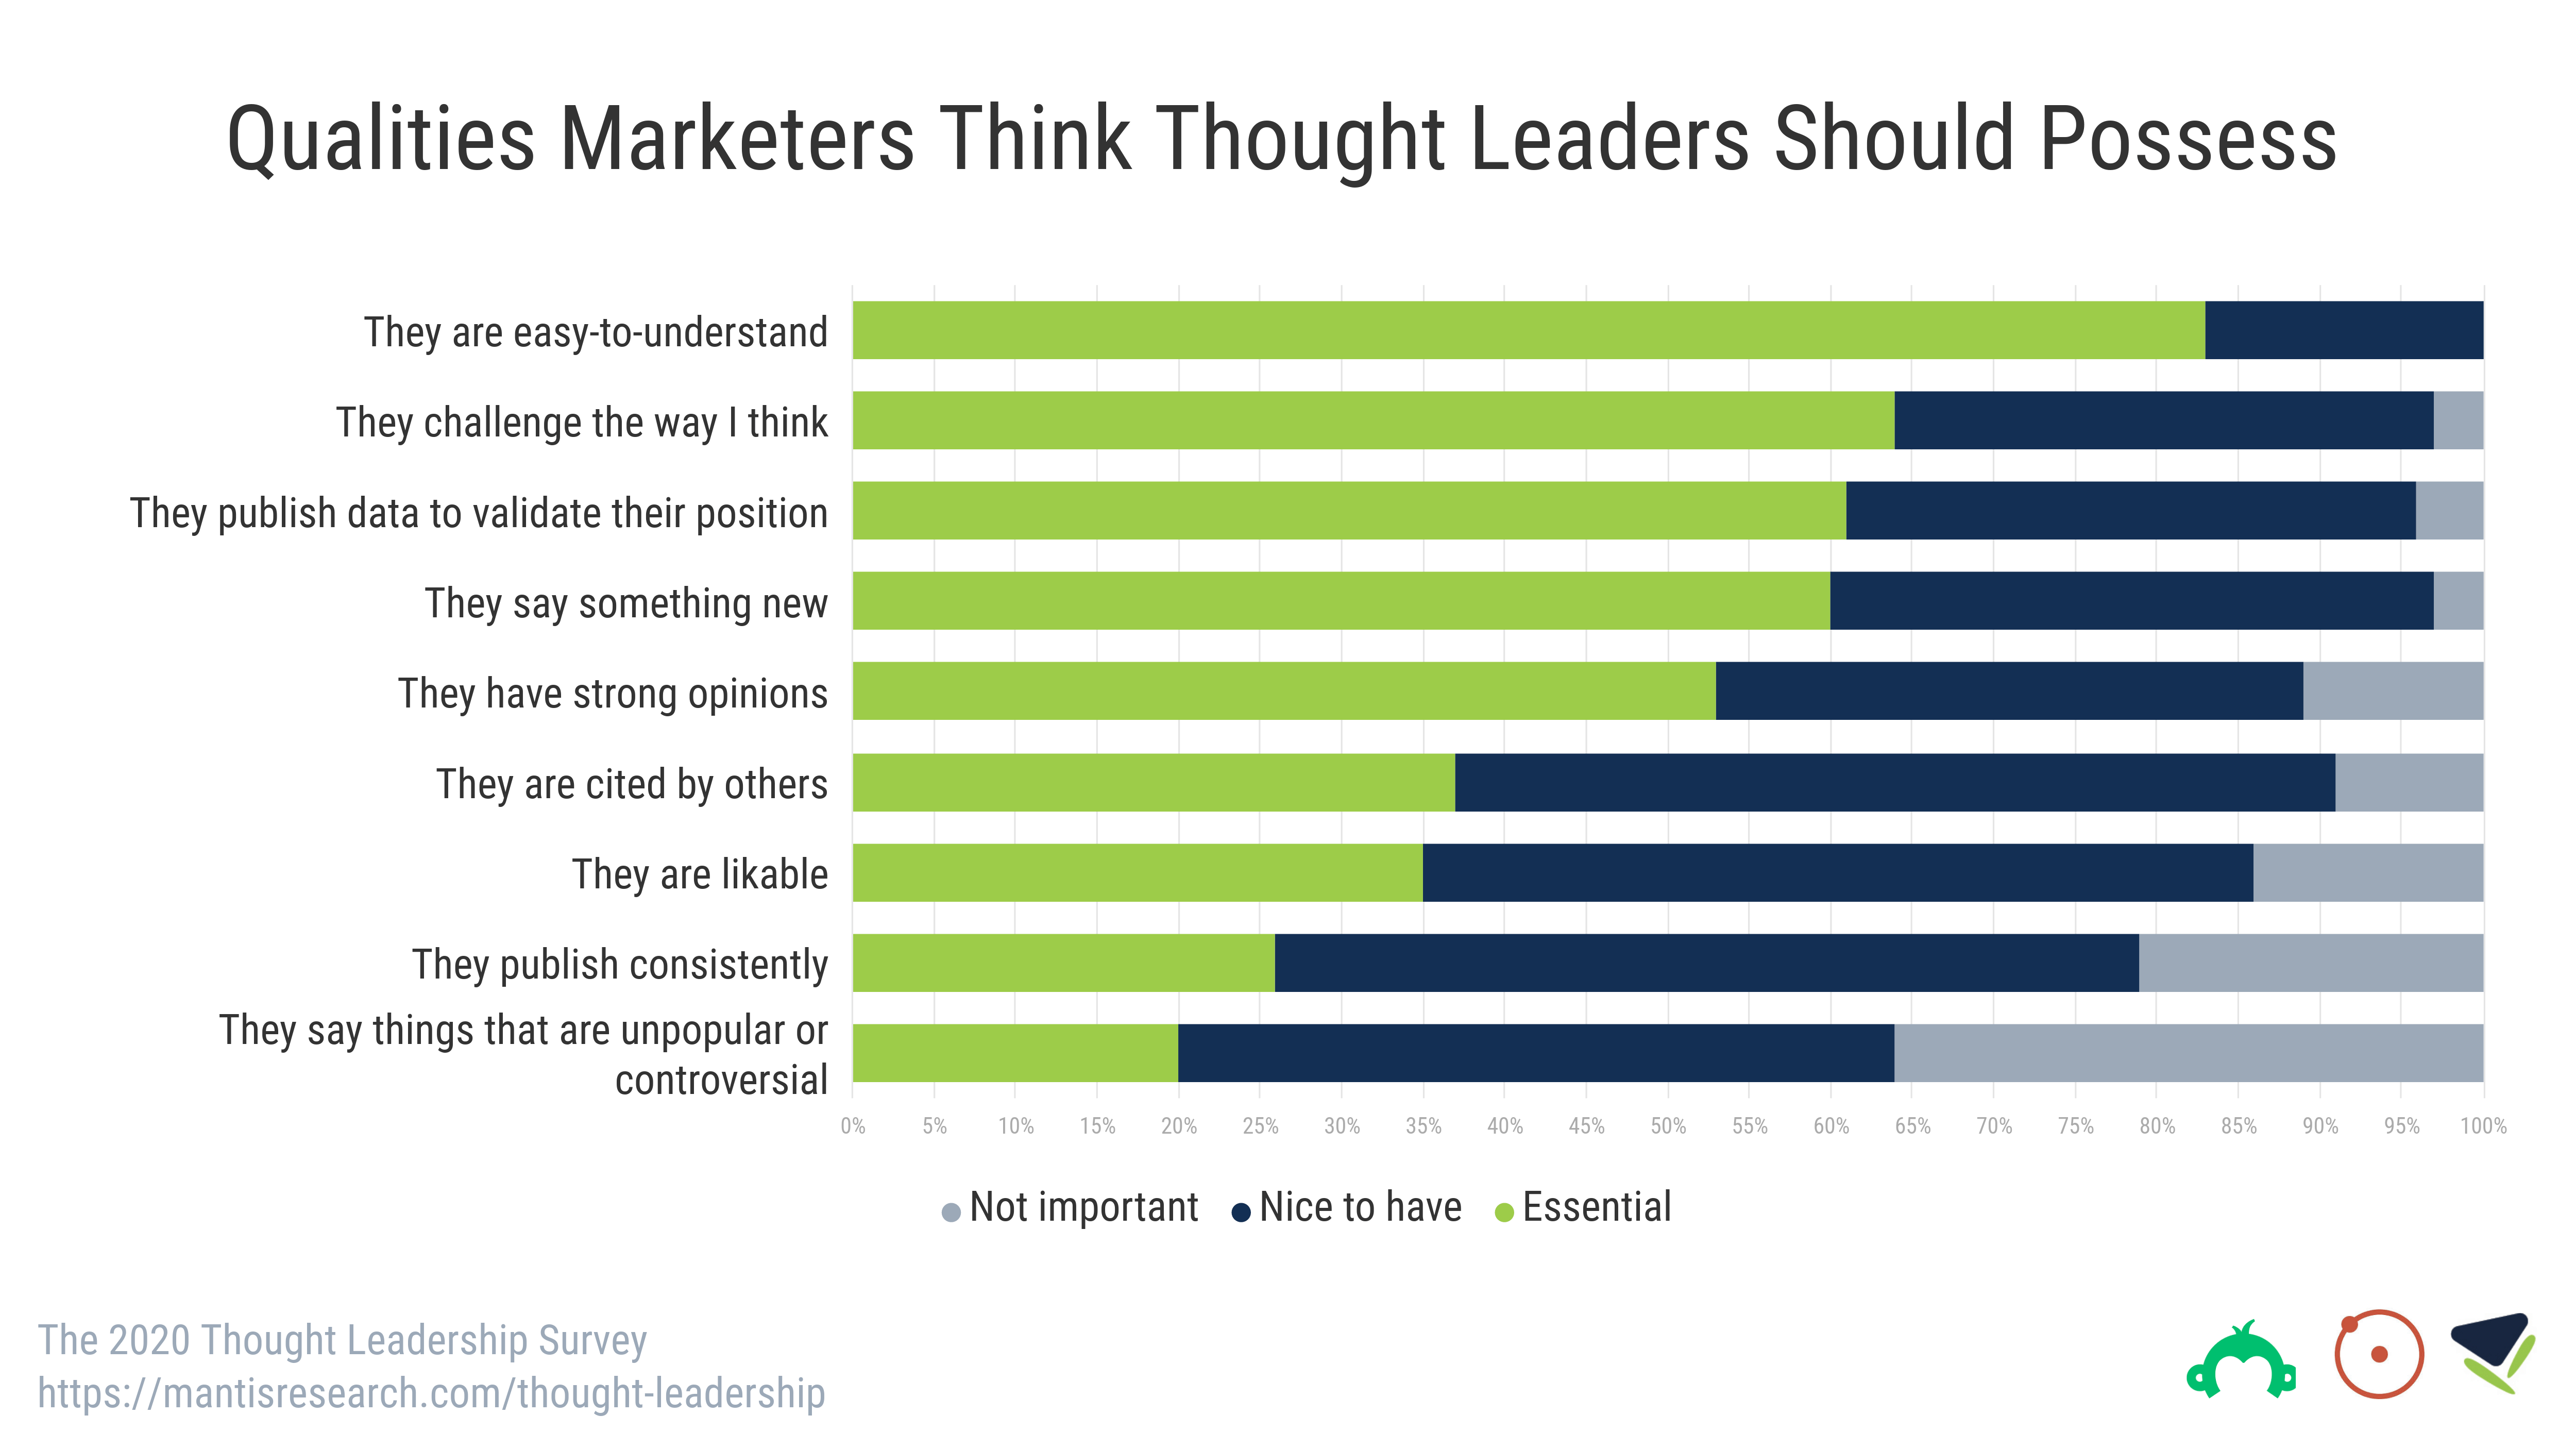 Qualities Marketers Think Thought Leaders Should Possess